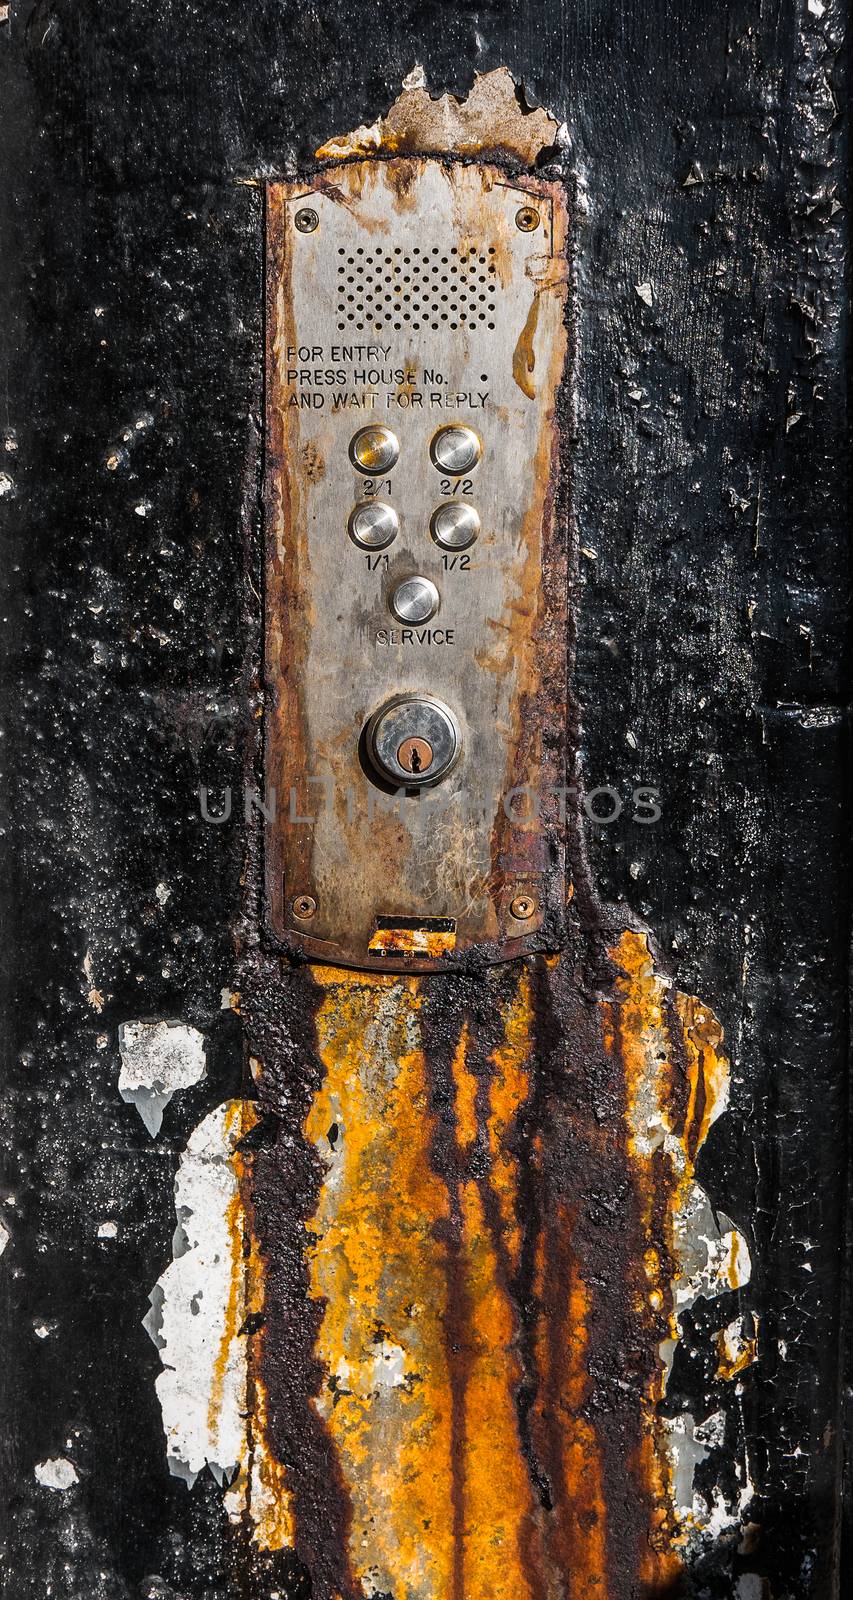 A Rusty Old Buzzer Or Intercom System For Flats In Glasgow, Scotland